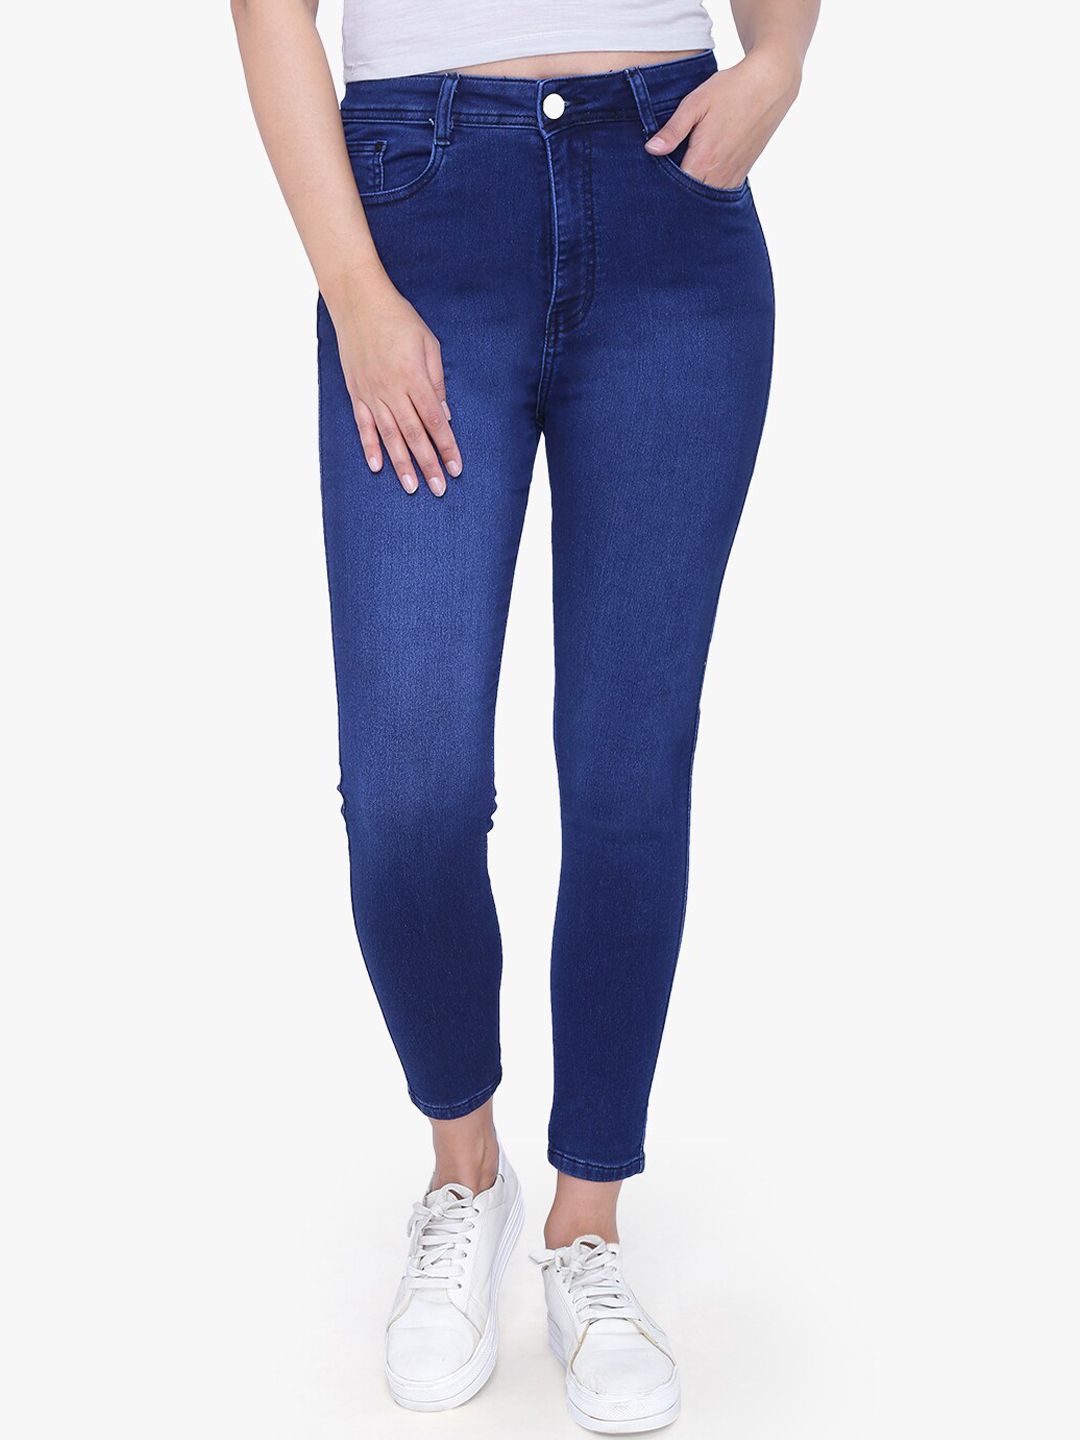 FCK-3 Women Blue Jean High-Rise Light Fade Stretchable Jeans Price in India